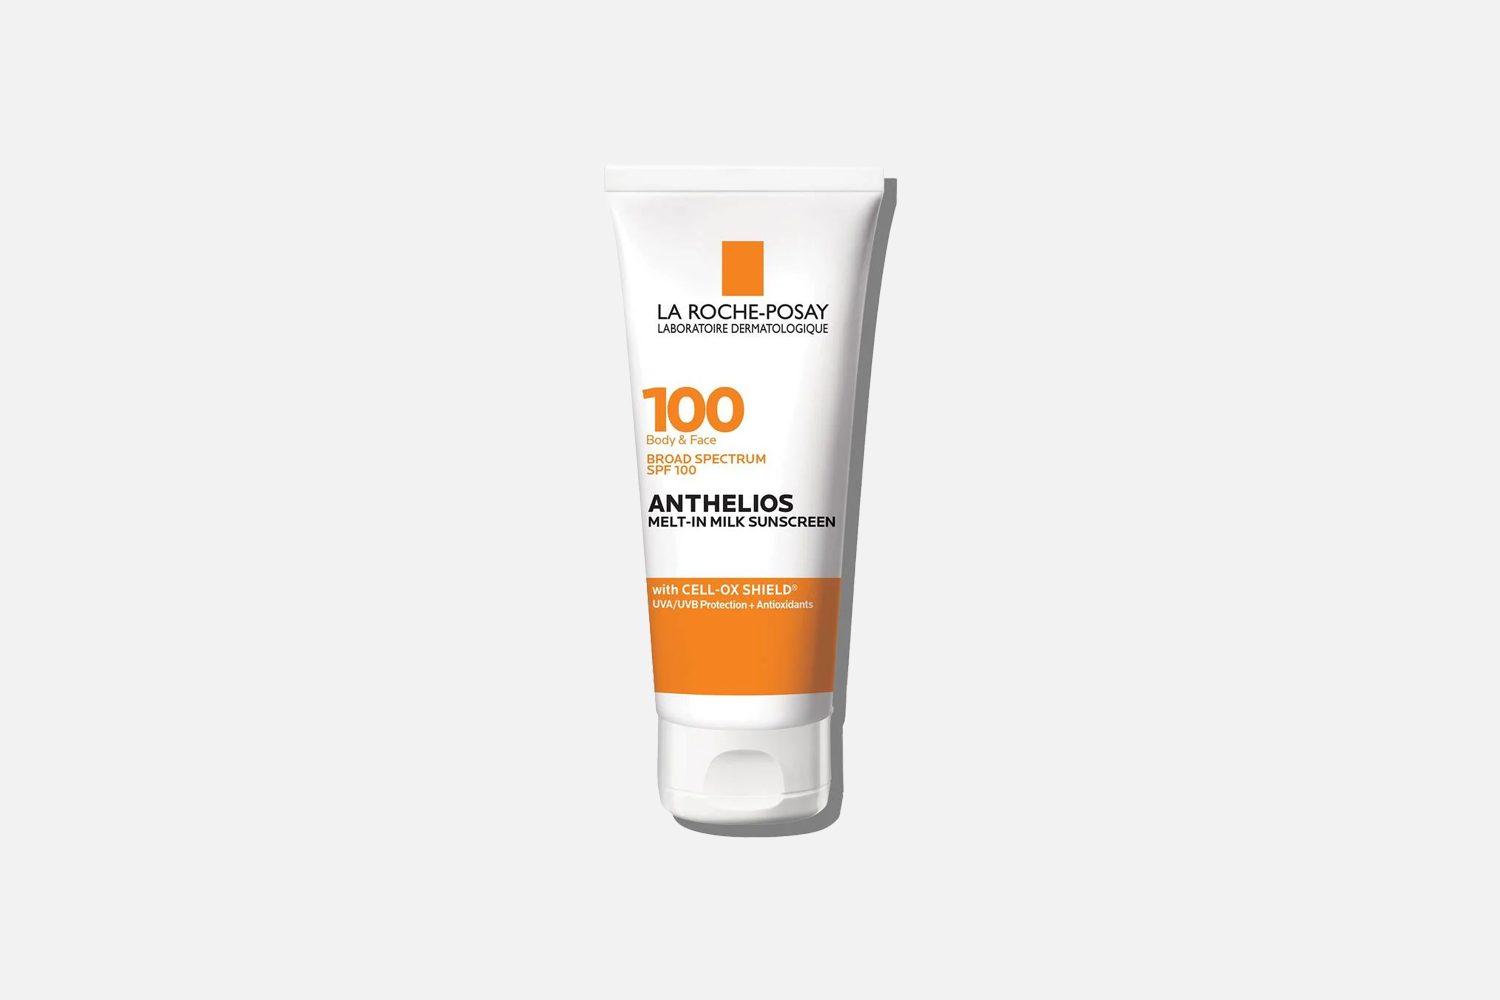 La Roche-Posay Anthelios Melt-In Milk Sunscreen for Face & Body SPF 100